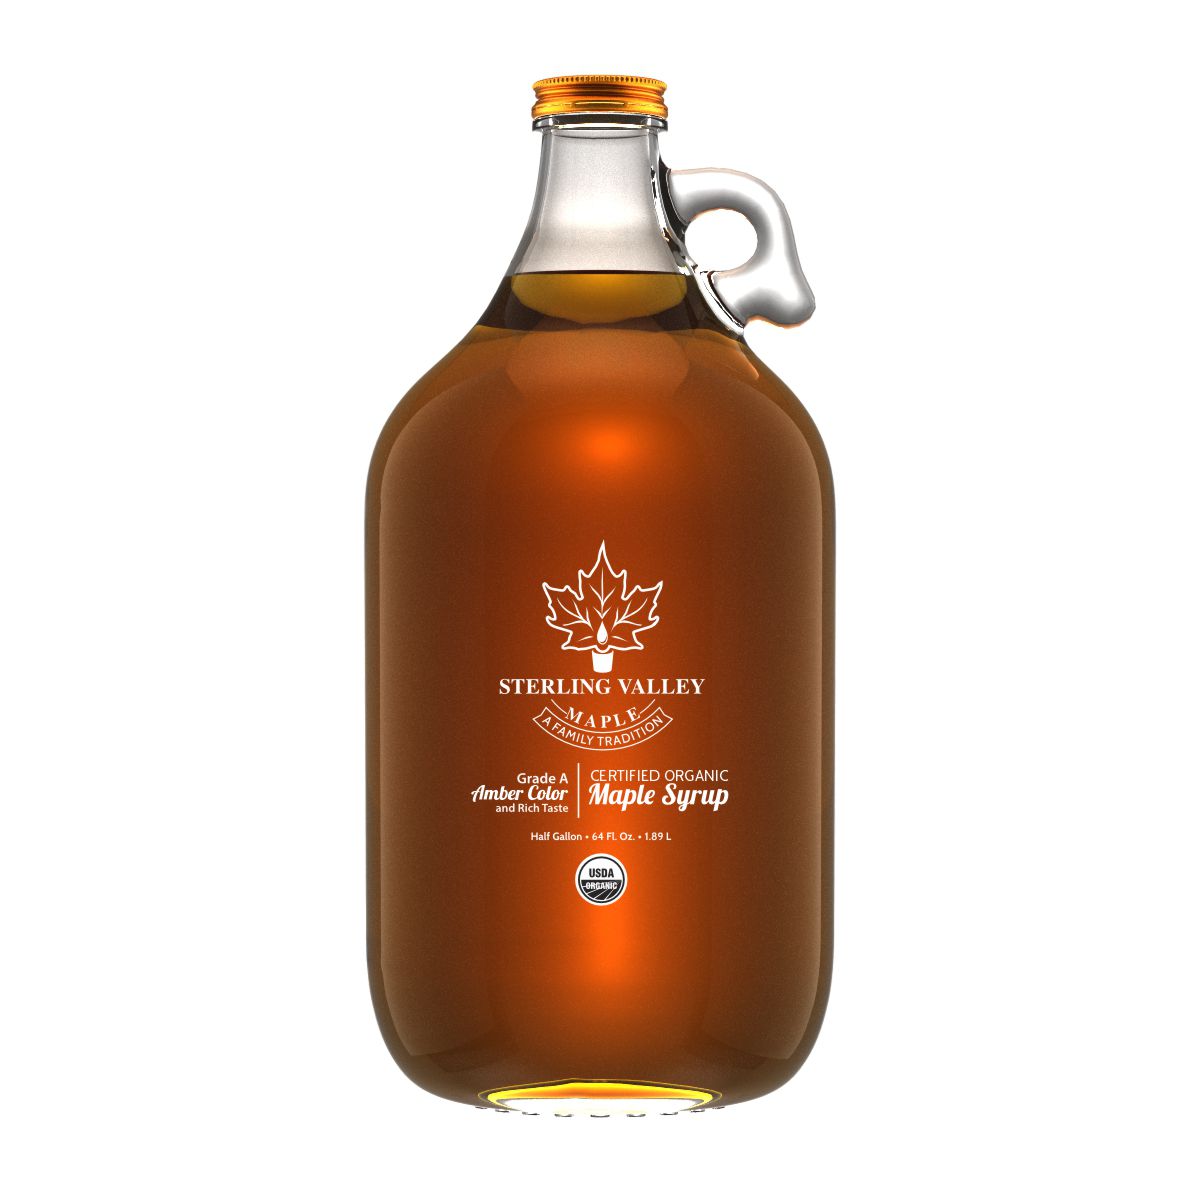 Certified Organic Maple Syrup: Amber Color with Rich Taste